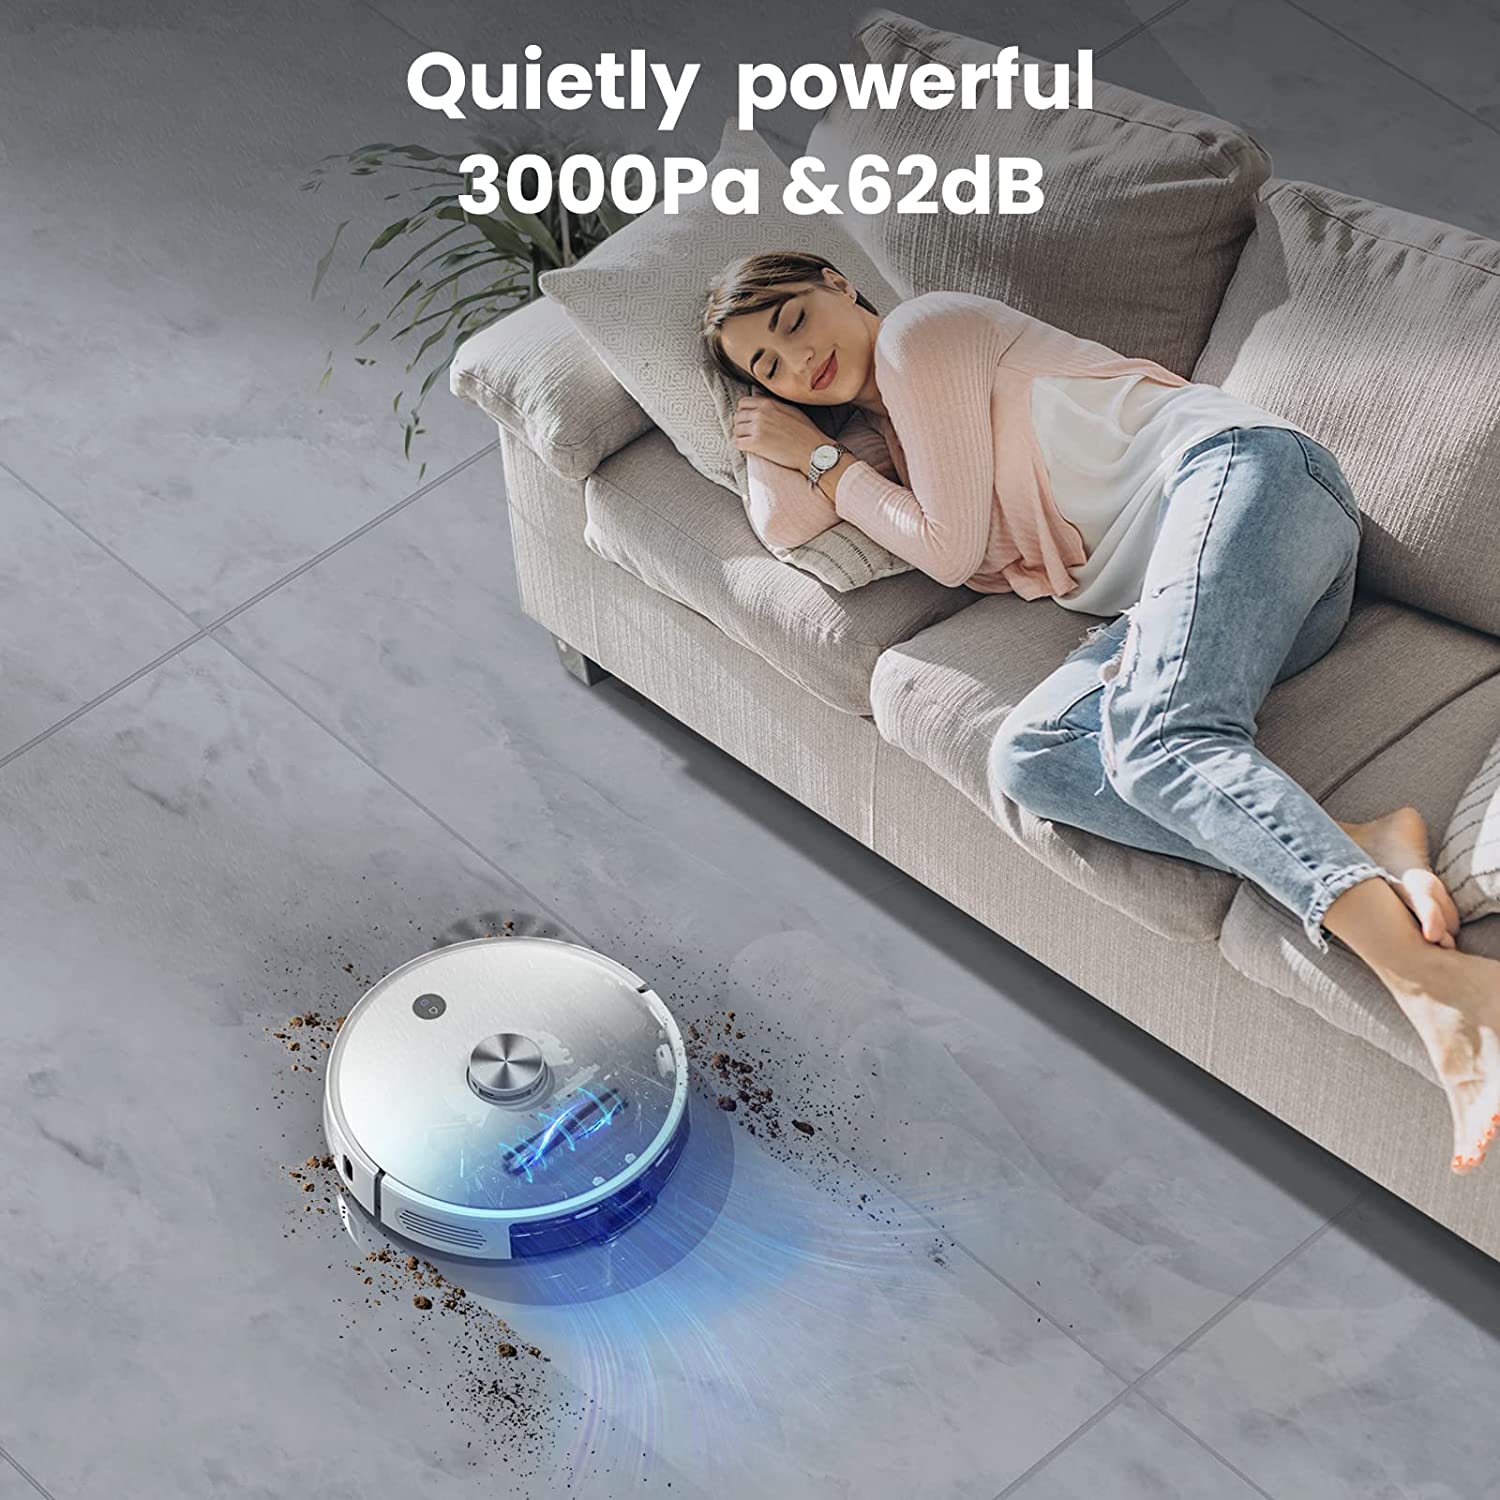 HONITURE Q5, 2-in-1 Robot Vacuum and Mop Cleaner with XL-600ml Dustbin,  2000Pa, 100mins Runtime, LCD Display, Voice & APP Control, Self-Charging